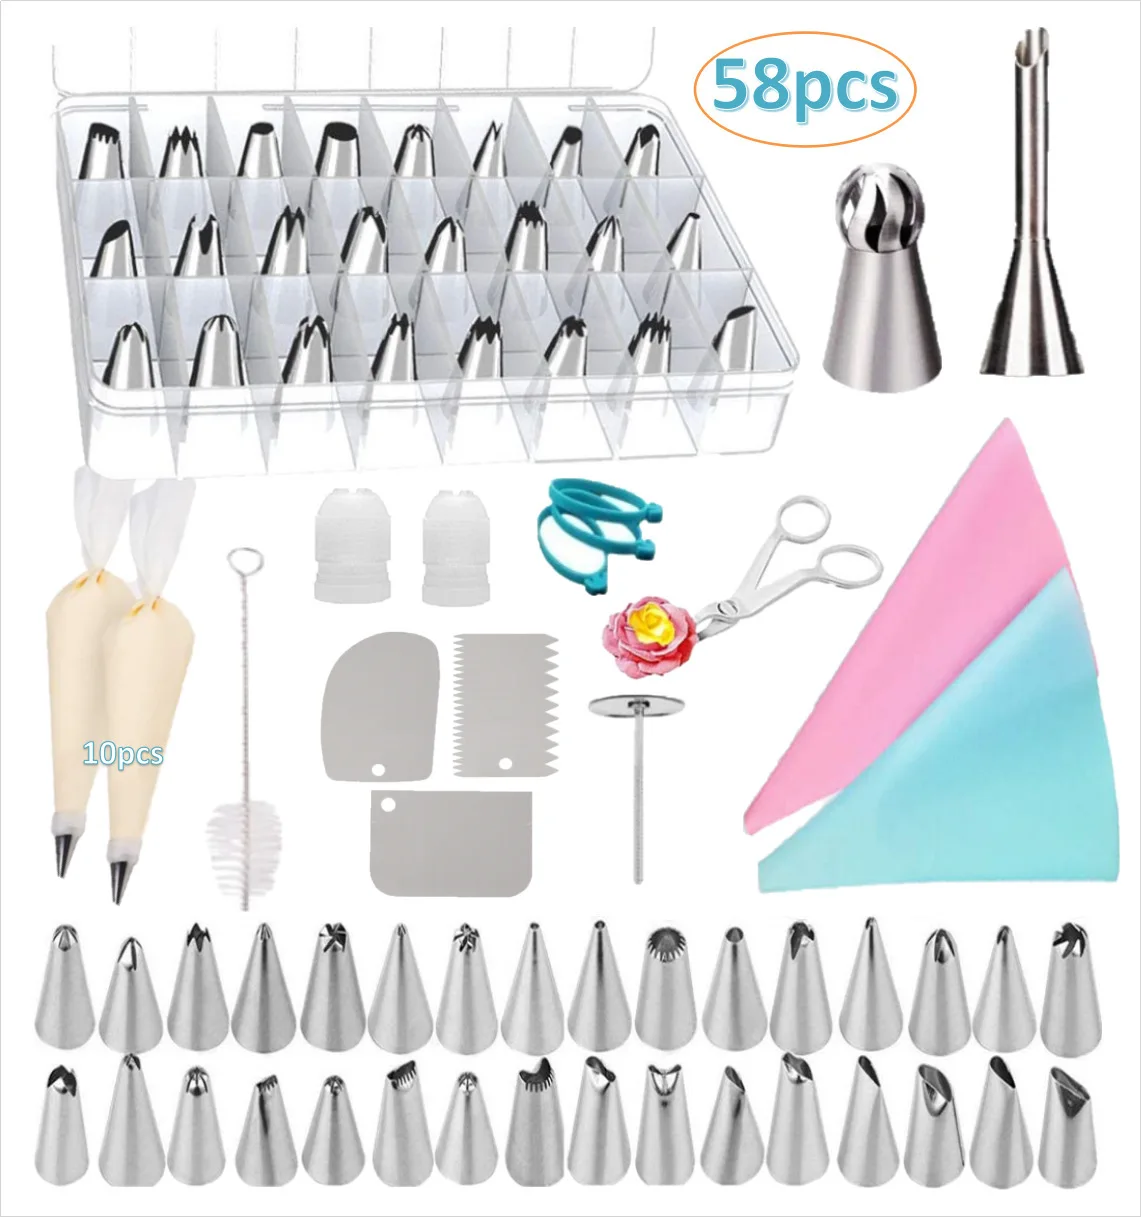 

58pcs Box Fondant Cake Decorating Tools Turntable Torch Nozzle Silicone Icing Piping Cream Pastry Bag Scraper Baking Accessories